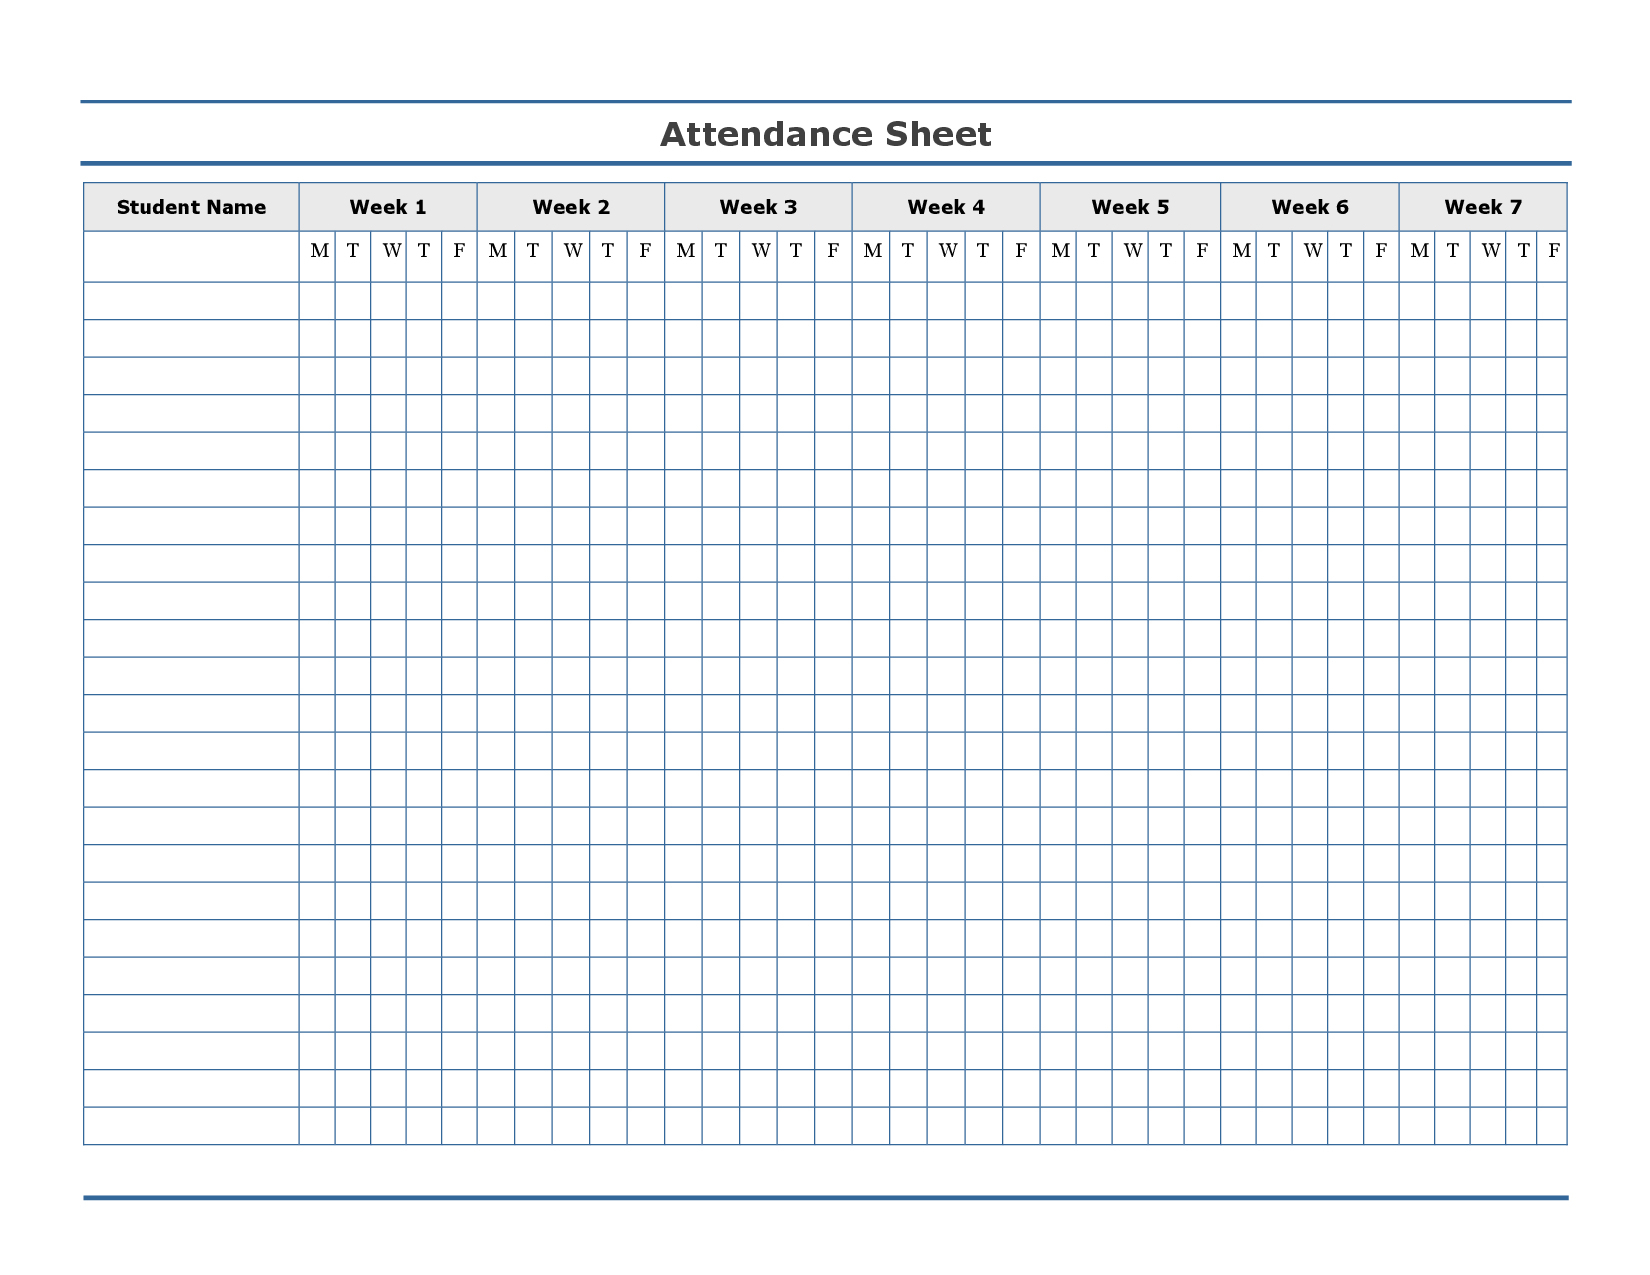 Free Printable Attendance Forms For Teachers – Jowo - Free Printable Attendance Forms For Teachers